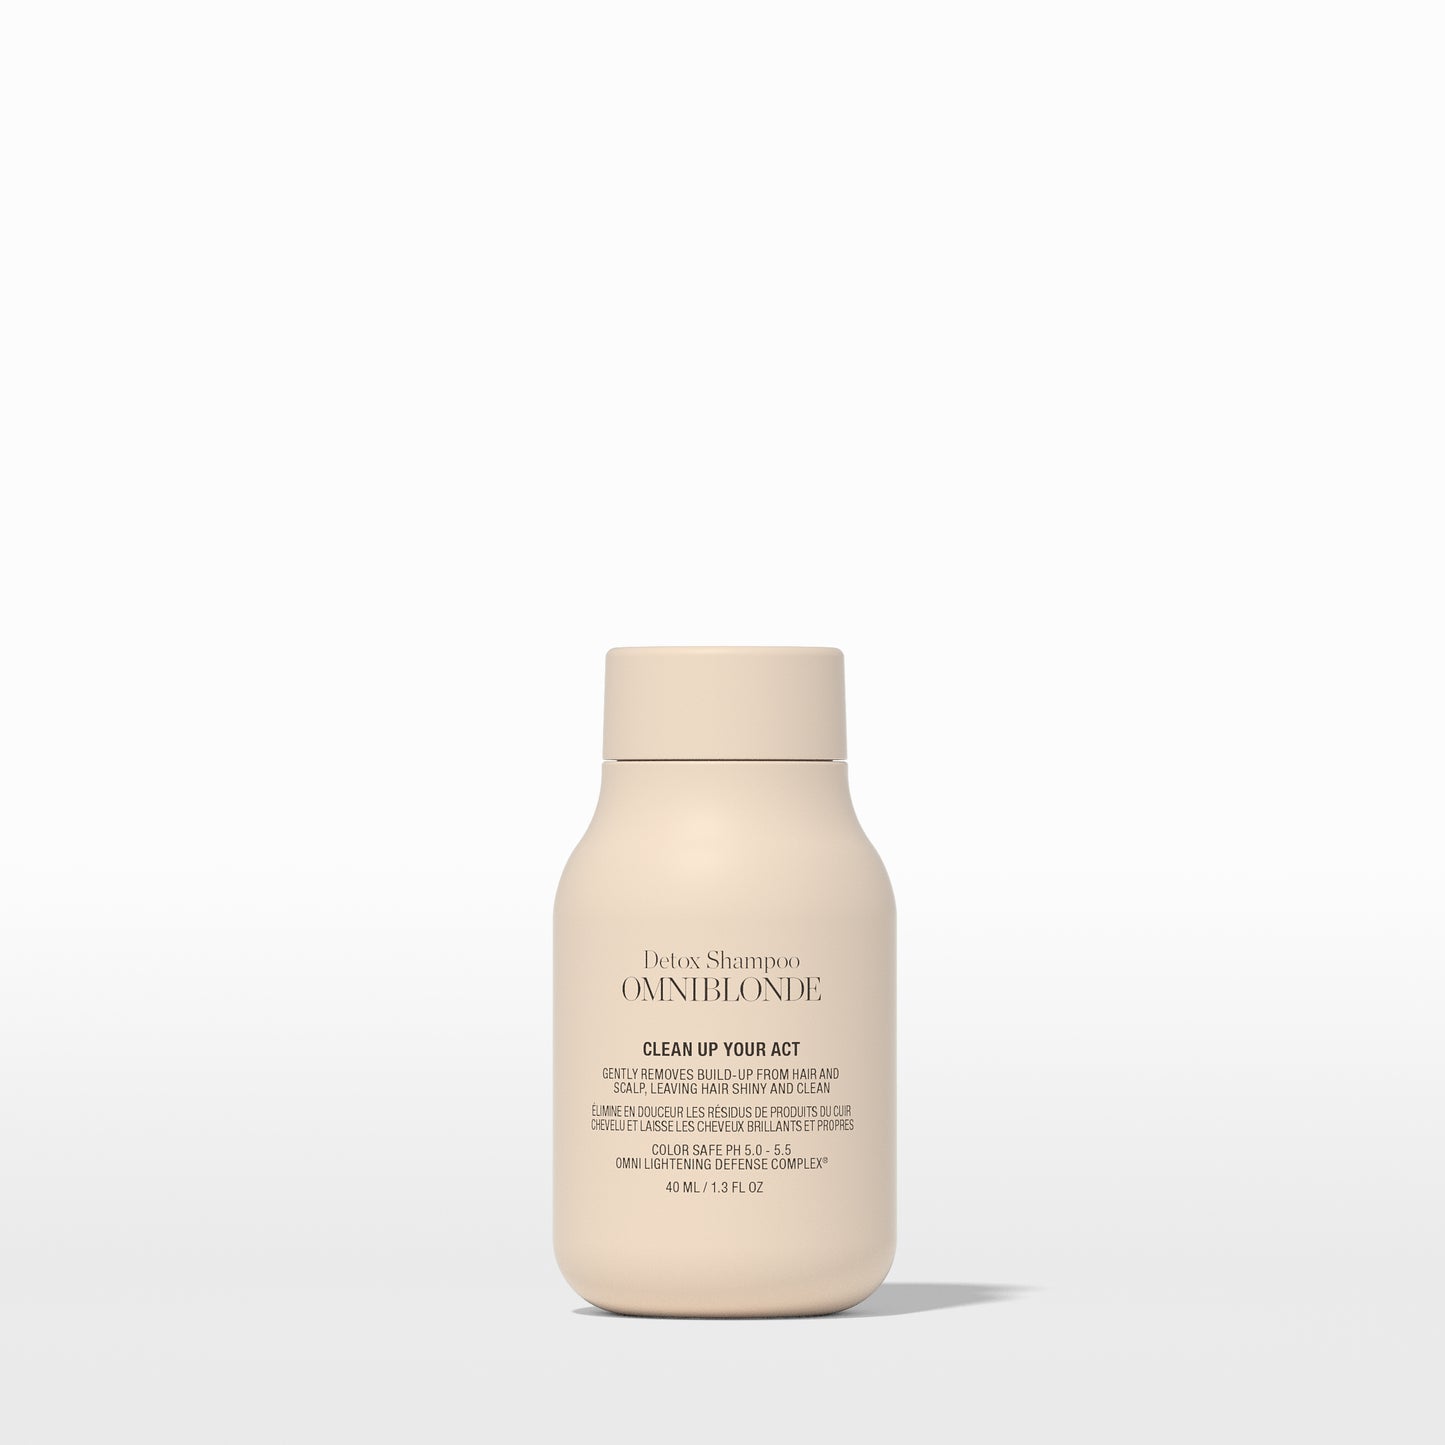 Omniblonde Detox Shampoo Clean up your act